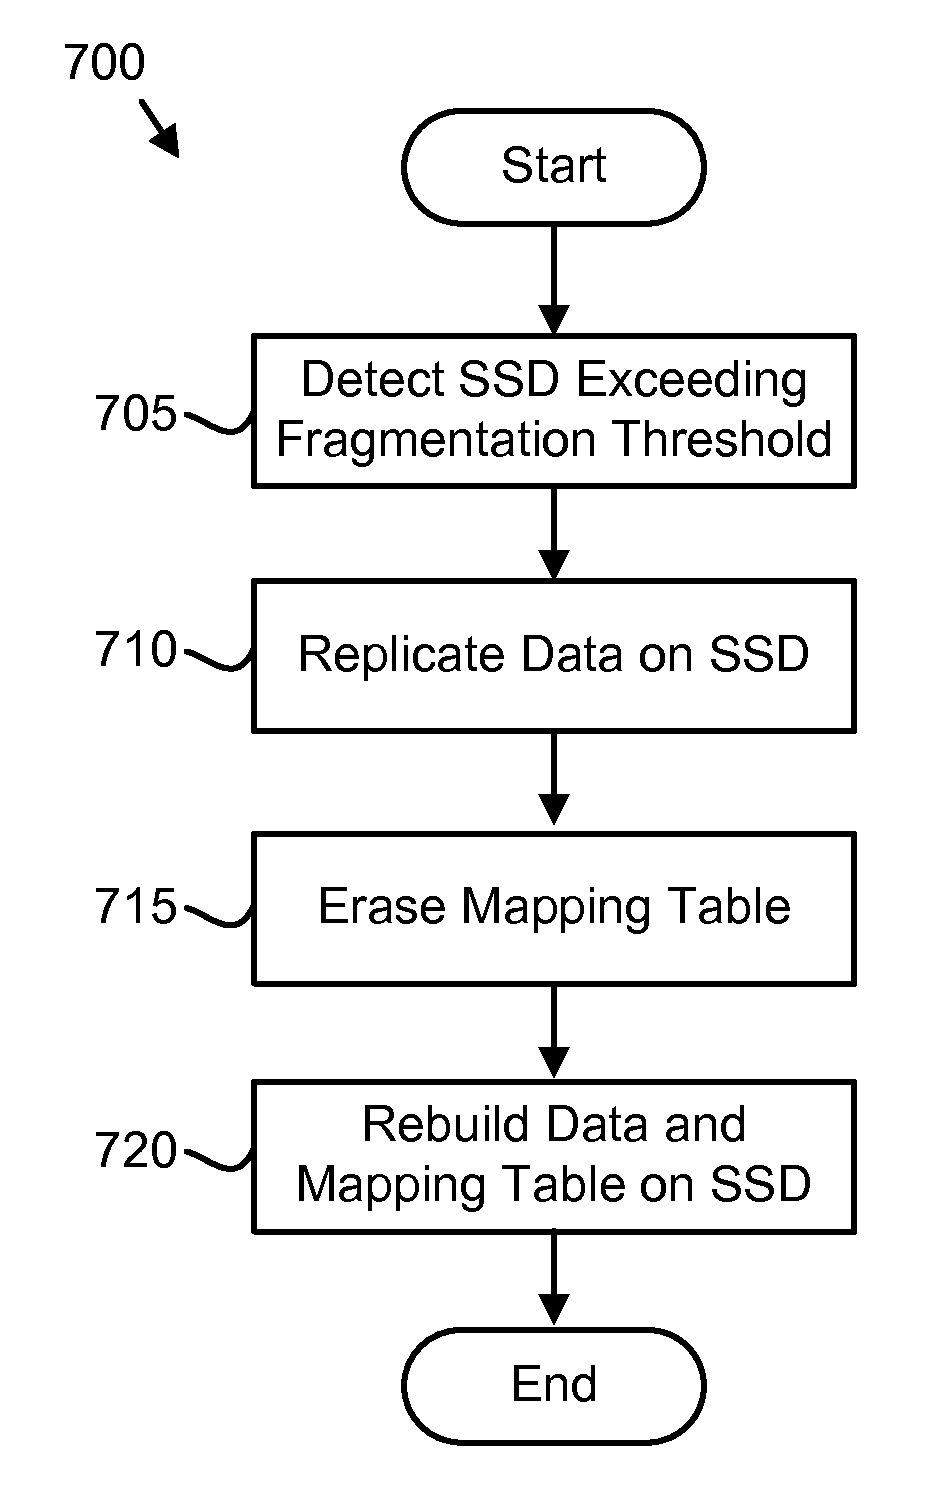 Method and apparatus for automatic solid state drive performance recovery